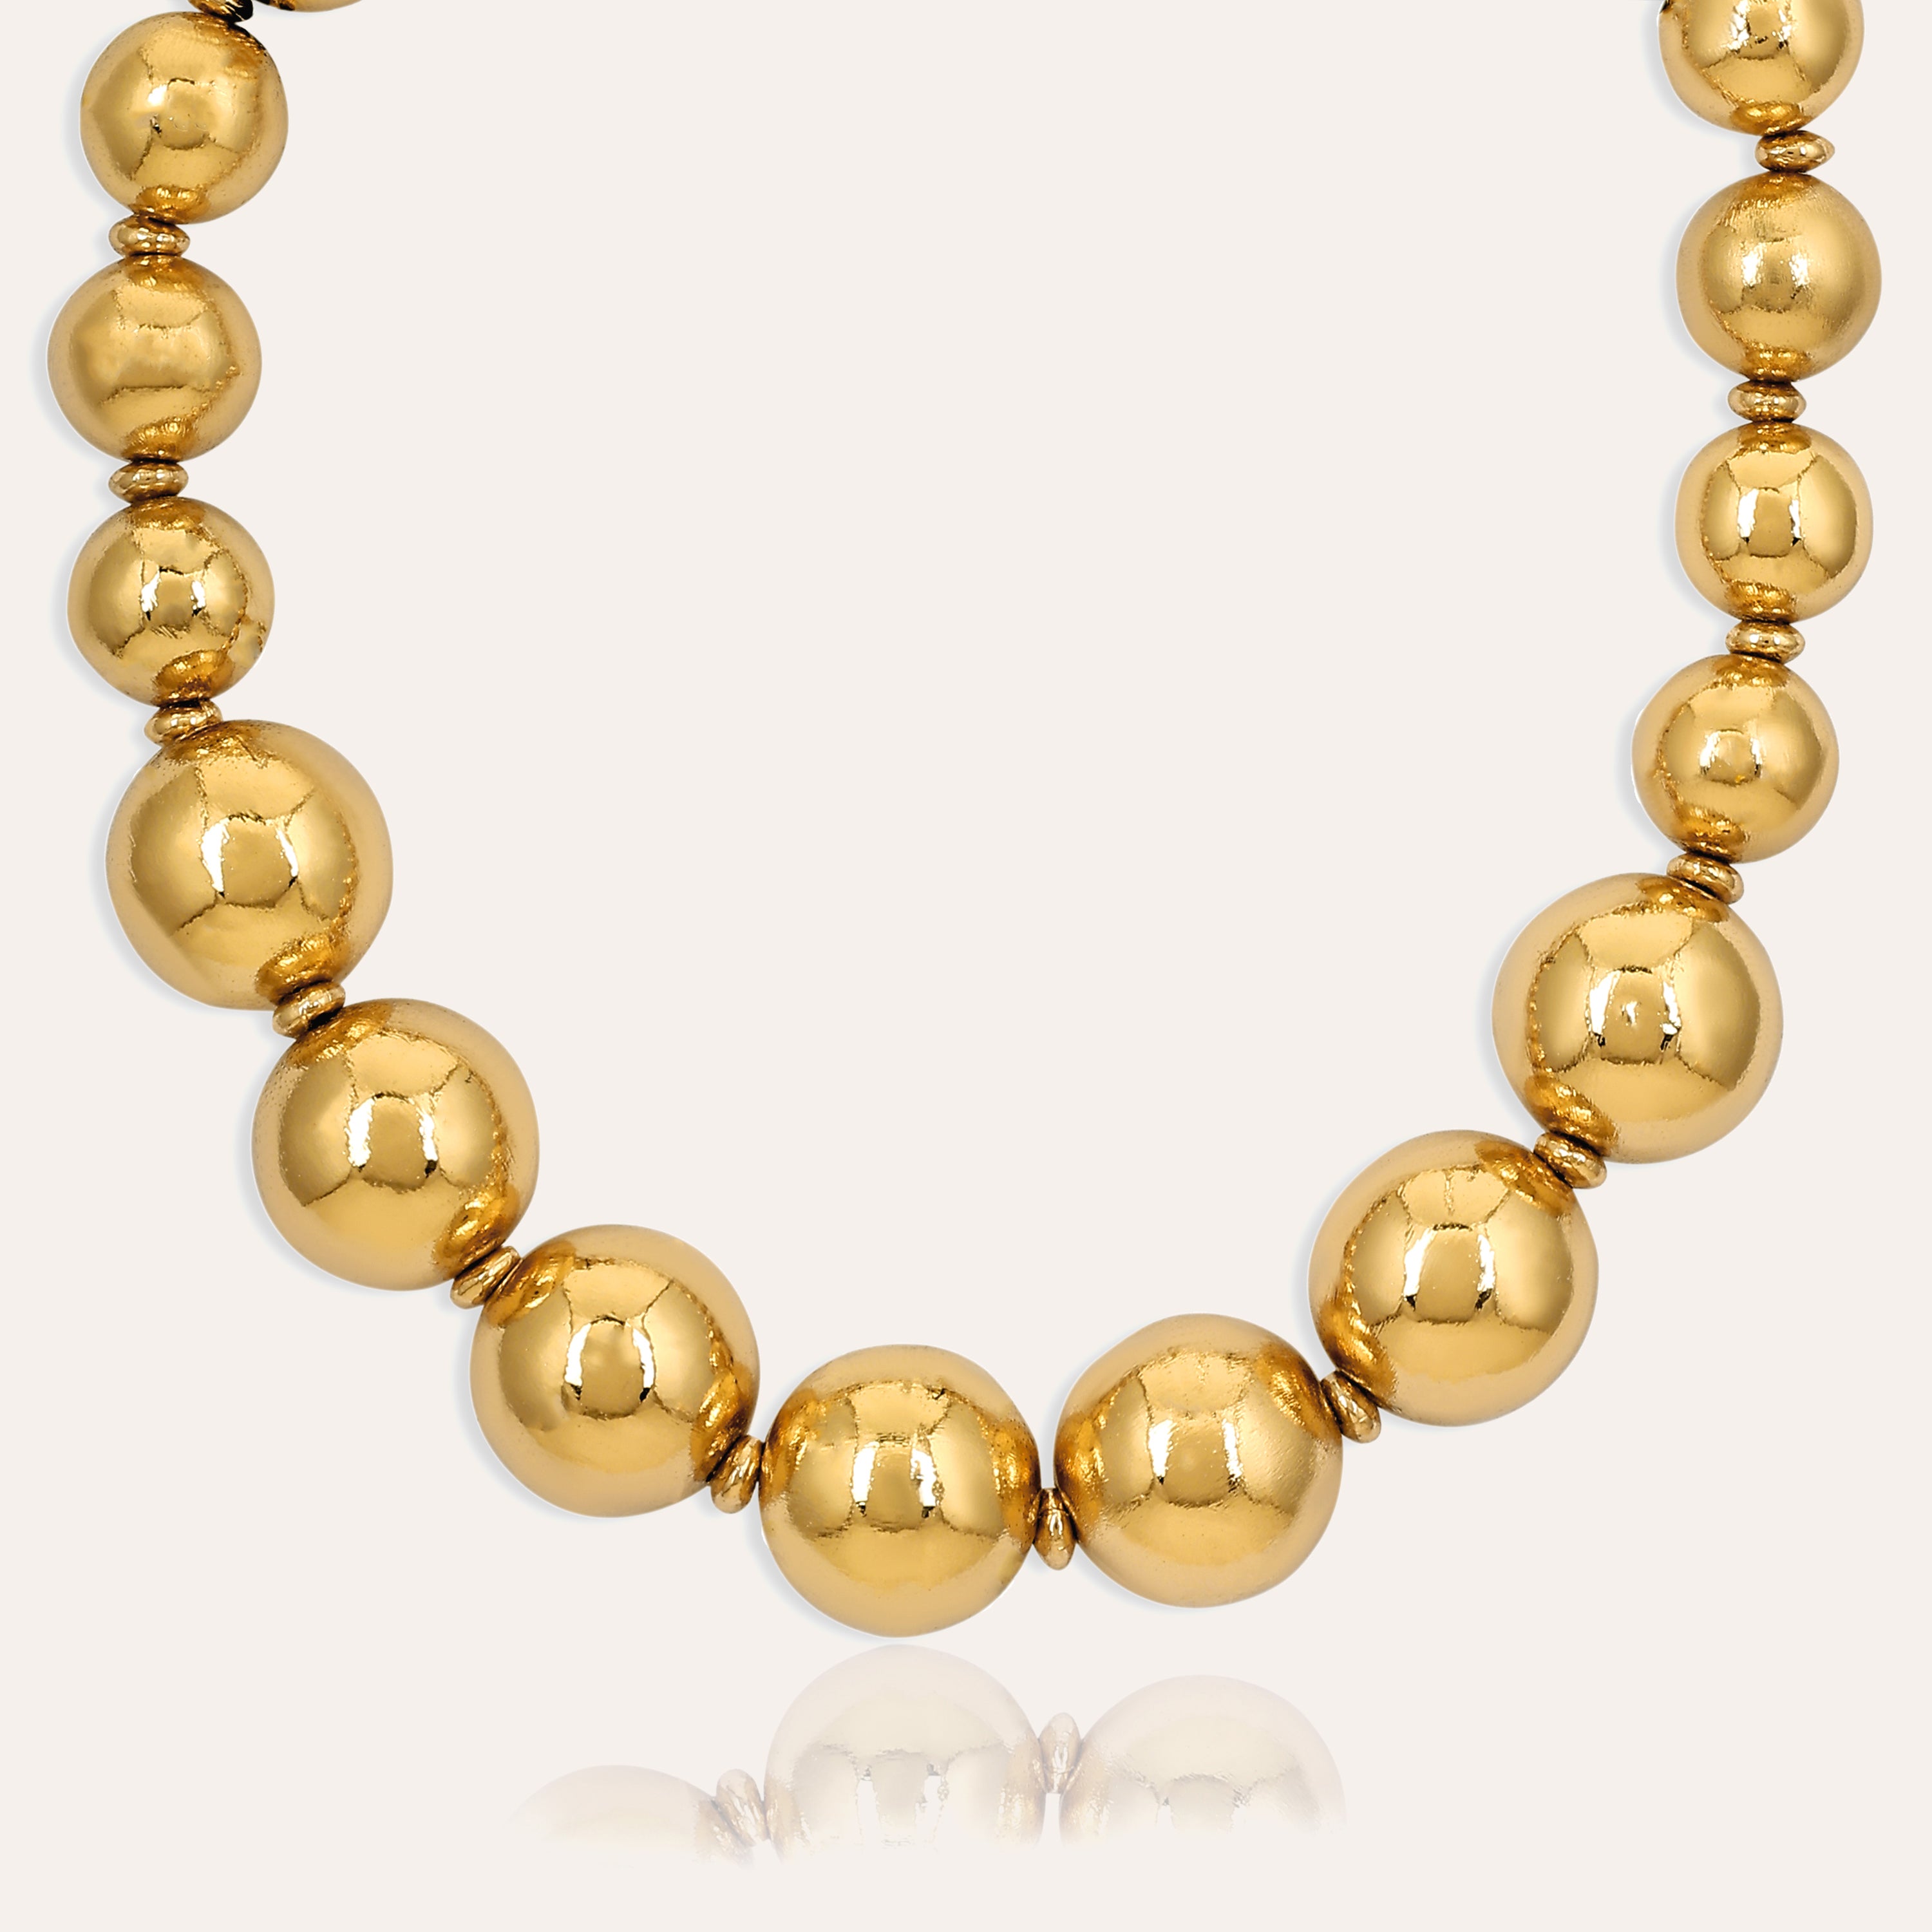 TFC Bold Beads Gold Plated Necklace-Enhance your elegance with our collection of gold-plated necklaces for women. Choose from stunning pendant necklaces, chic choker necklaces, and trendy layered necklaces. Our sleek and dainty designs are both affordable and anti-tarnish, ensuring lasting beauty. Enjoy the cheapest fashion jewellery, lightweight and stylish- only at The Fun Company